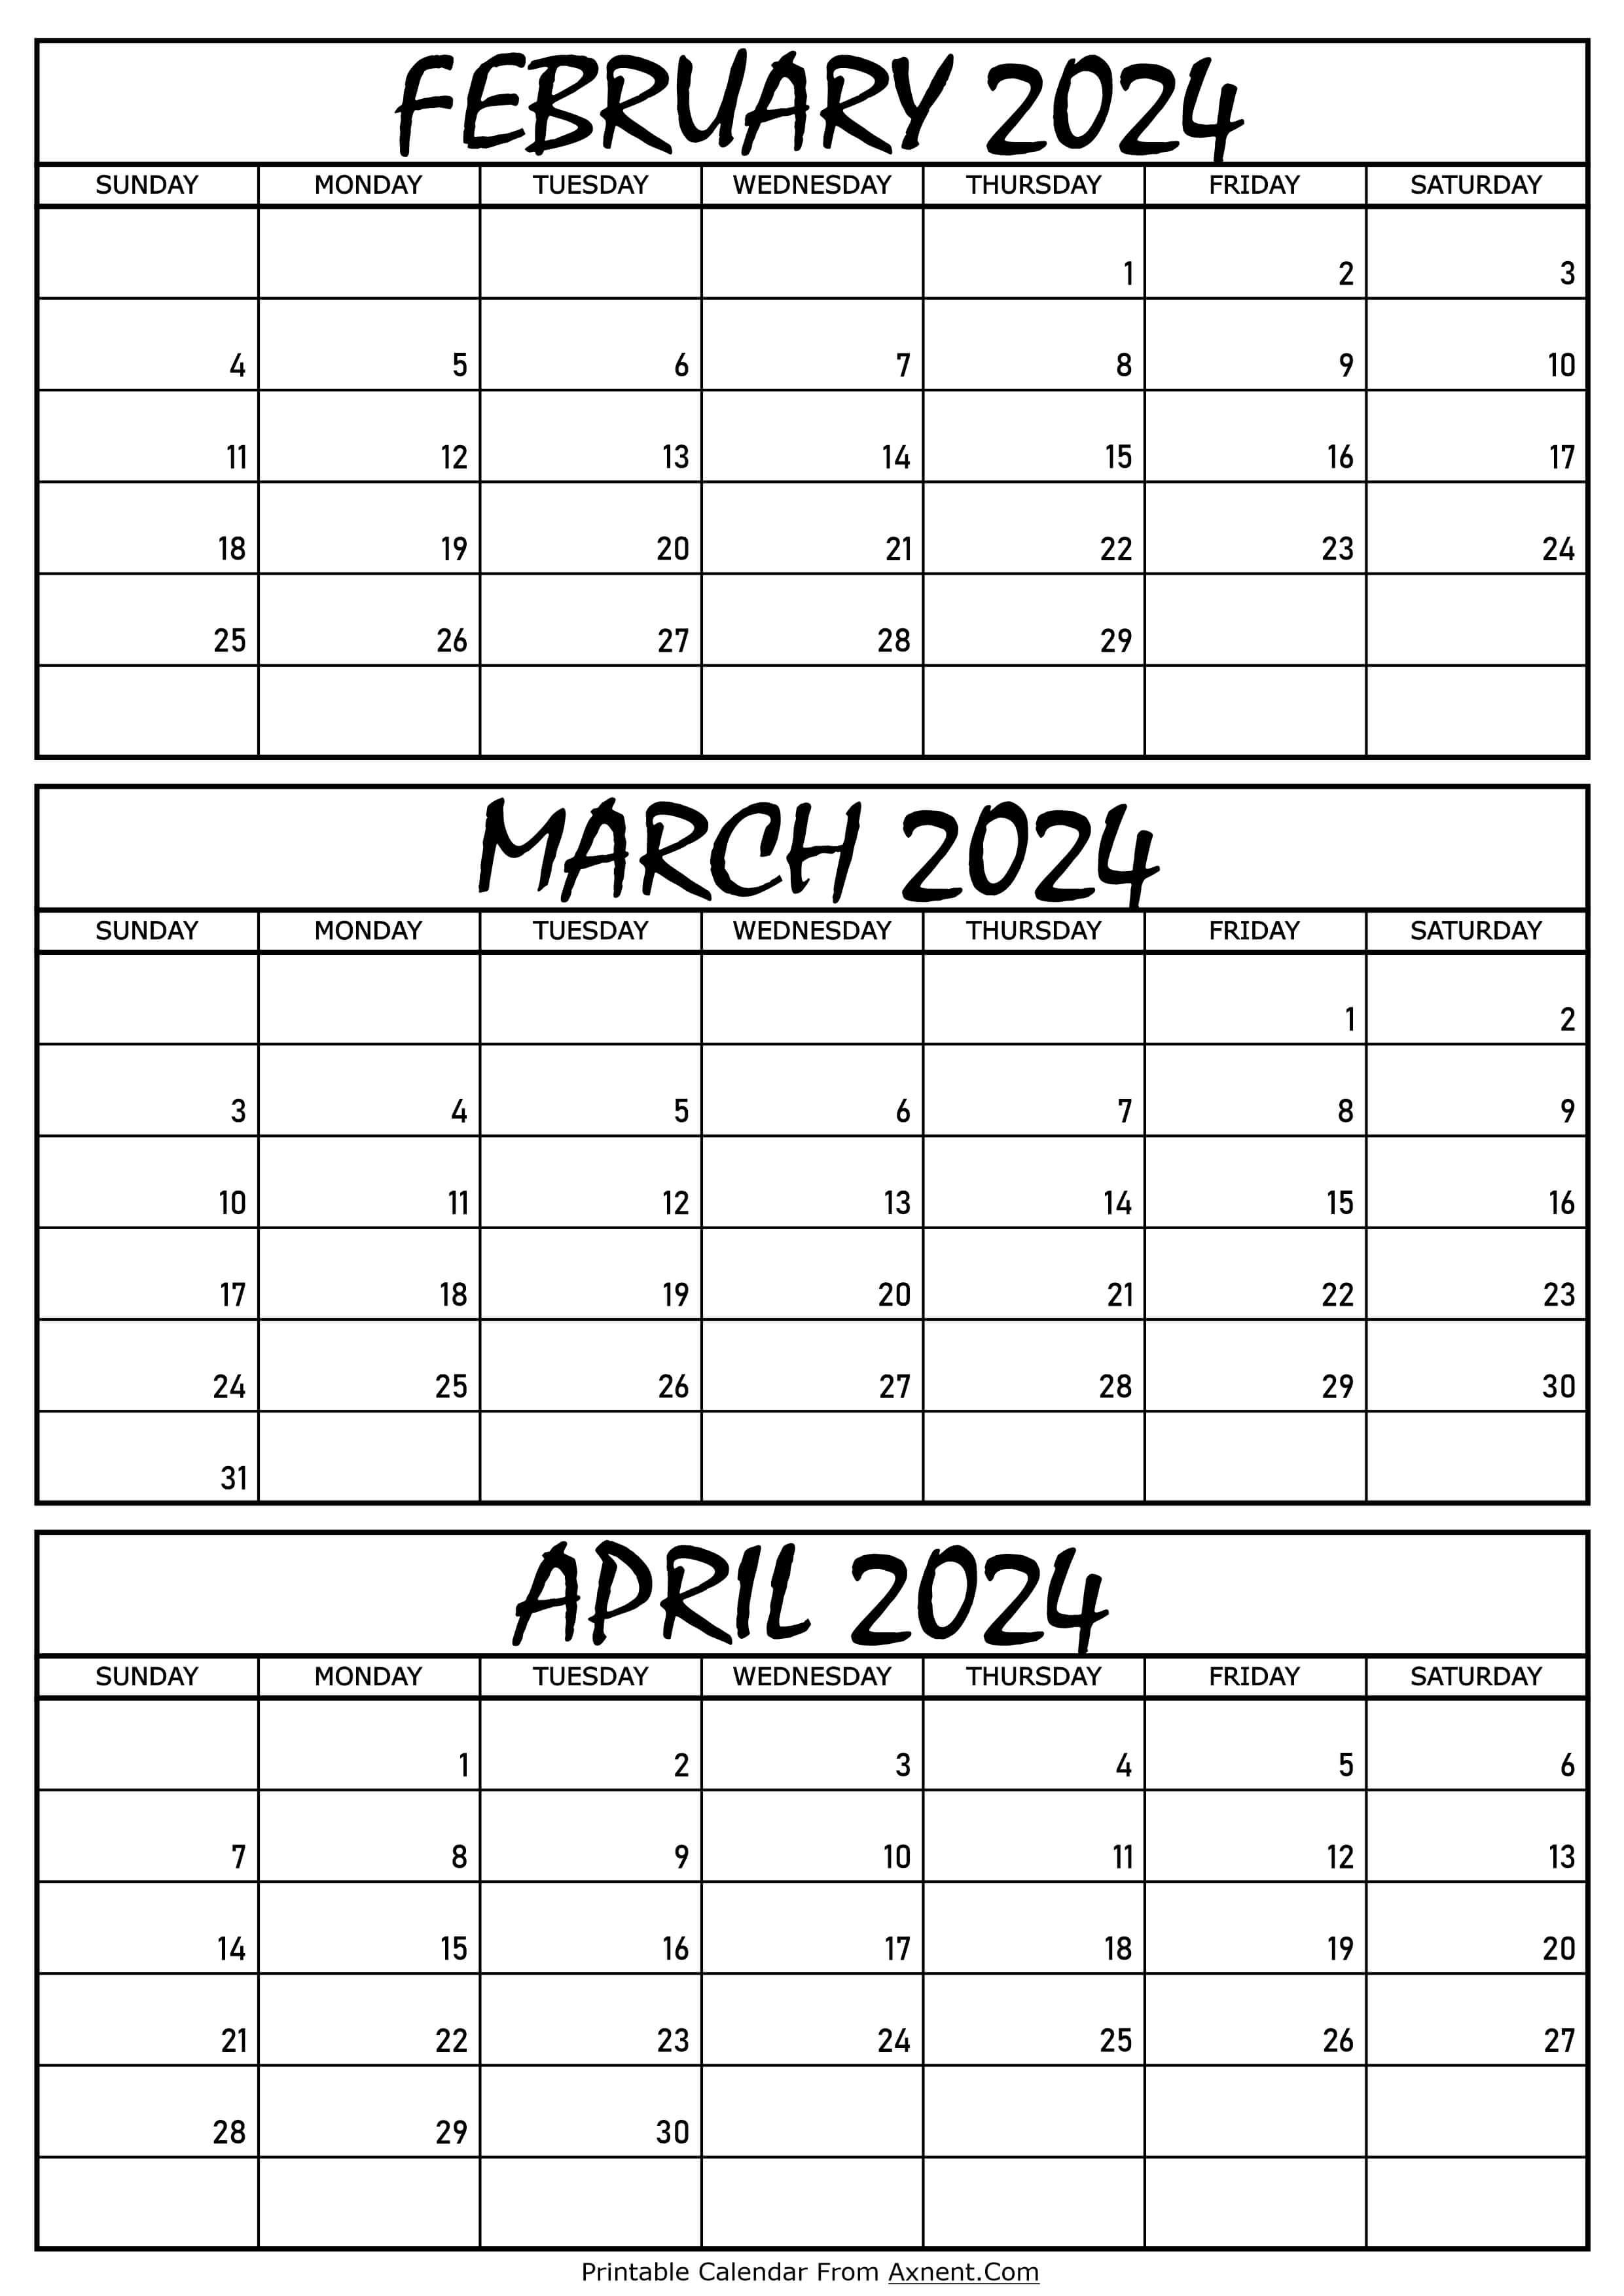 February March and April Calendar 2024